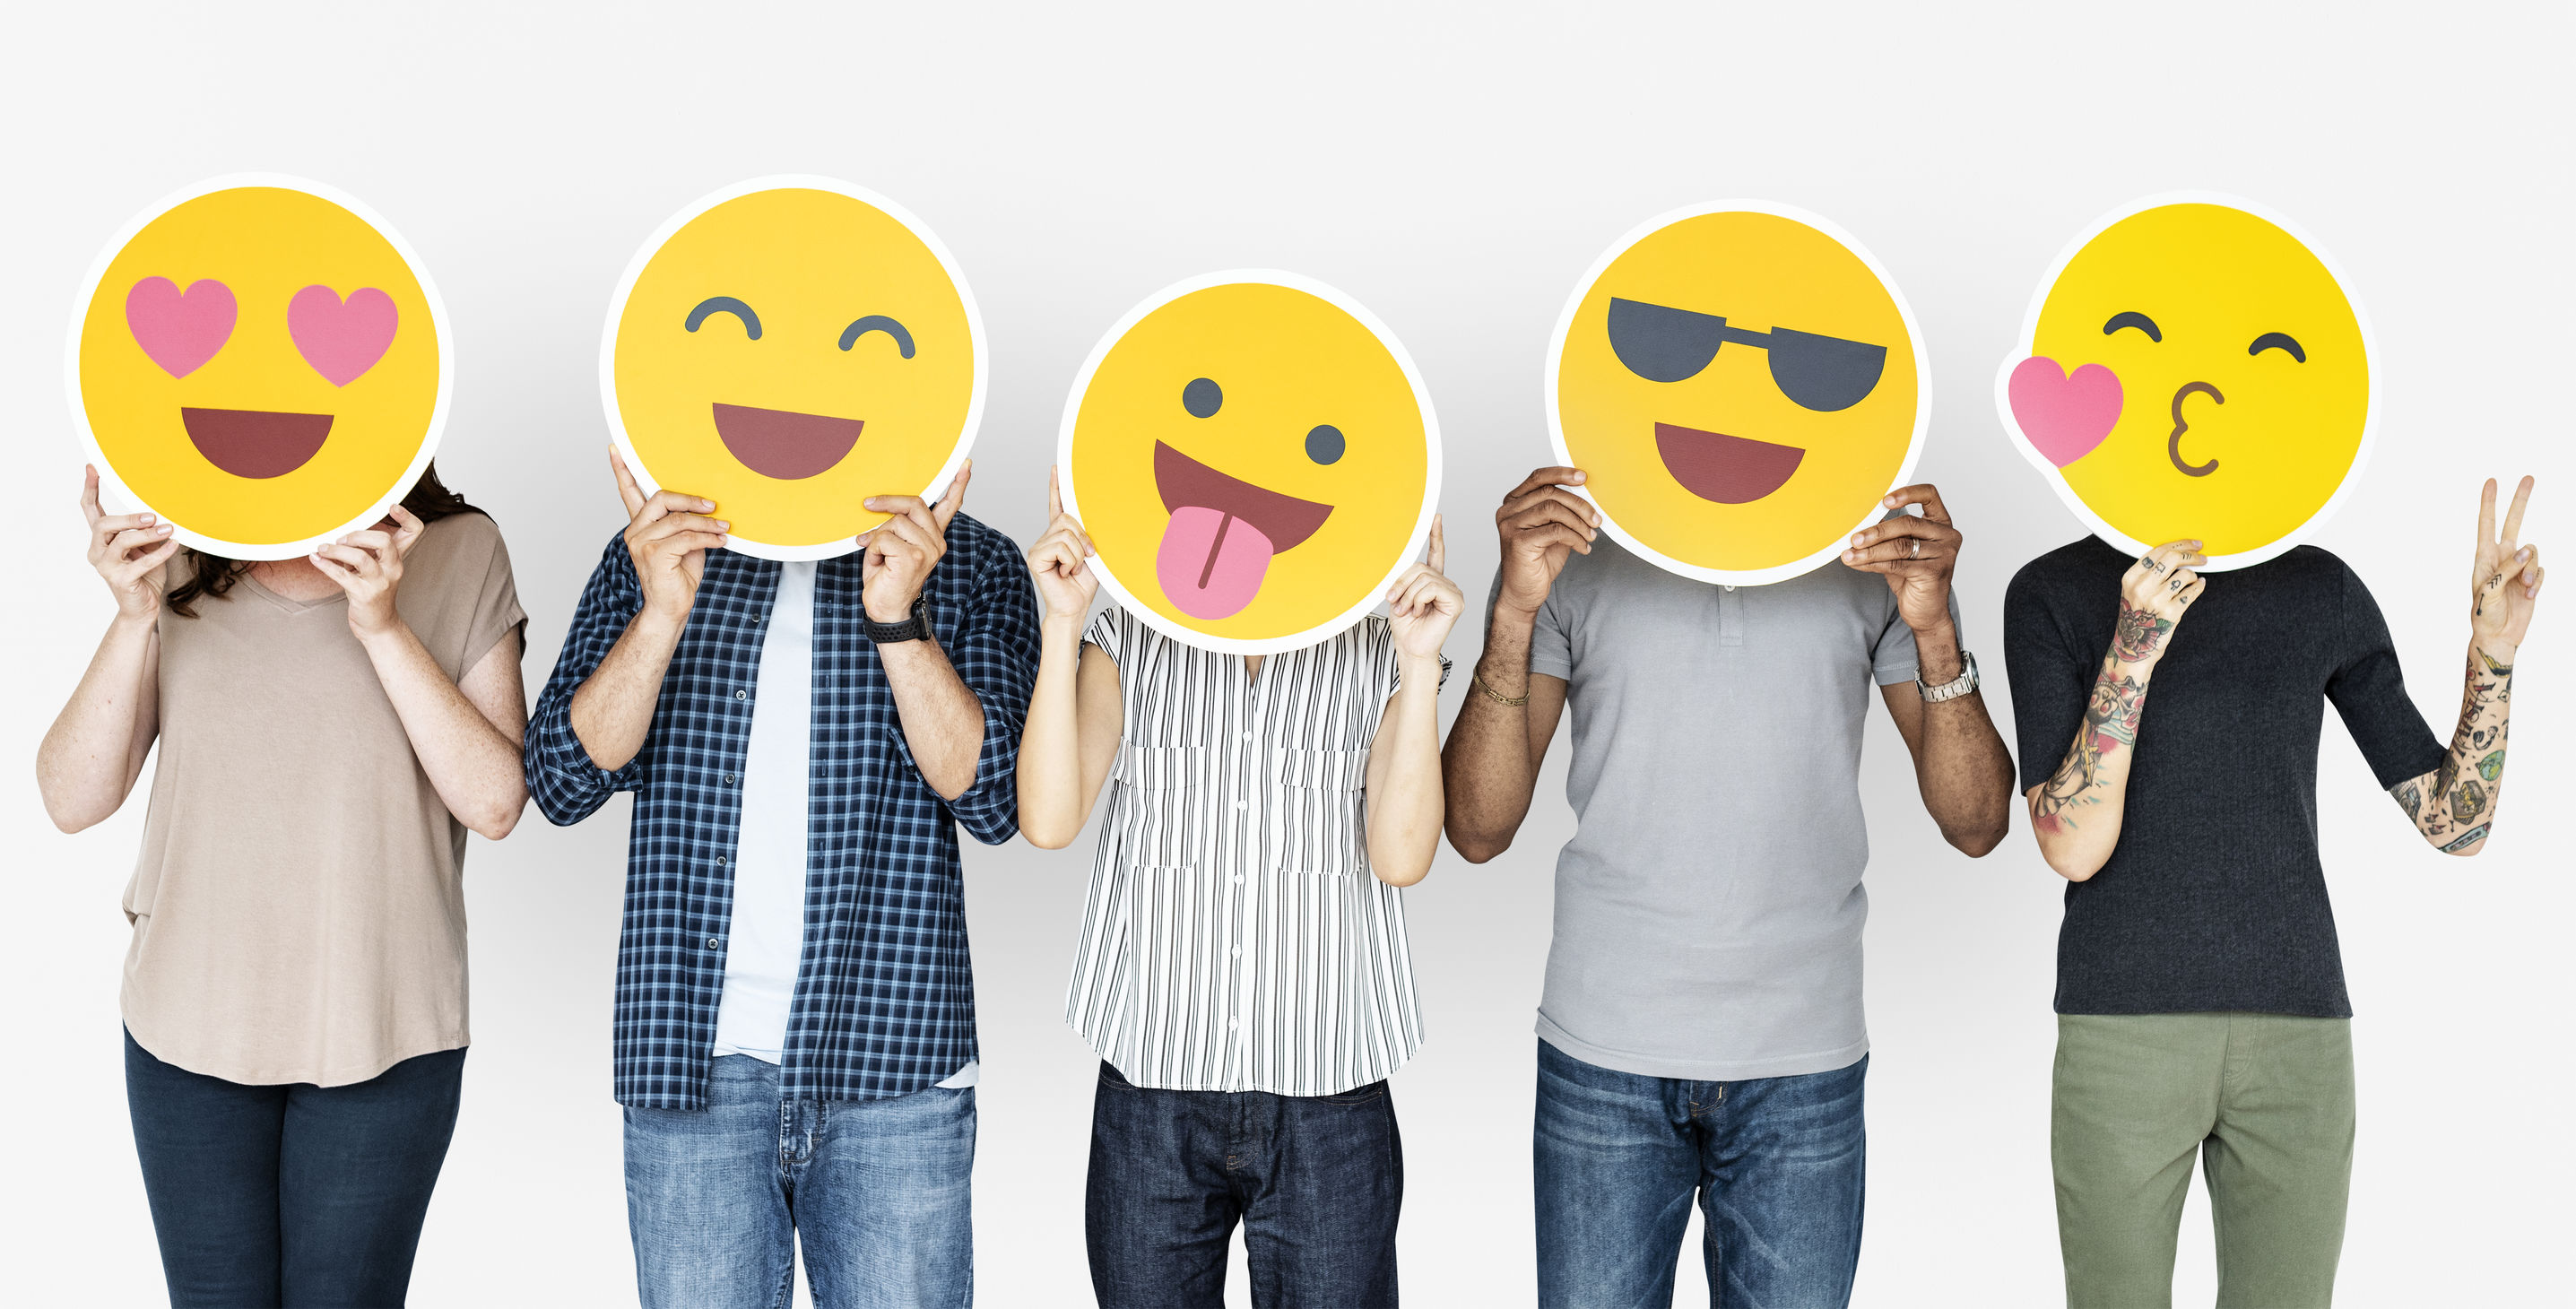 Five people standing side by side and holding up funny emoji icons in front of their faces